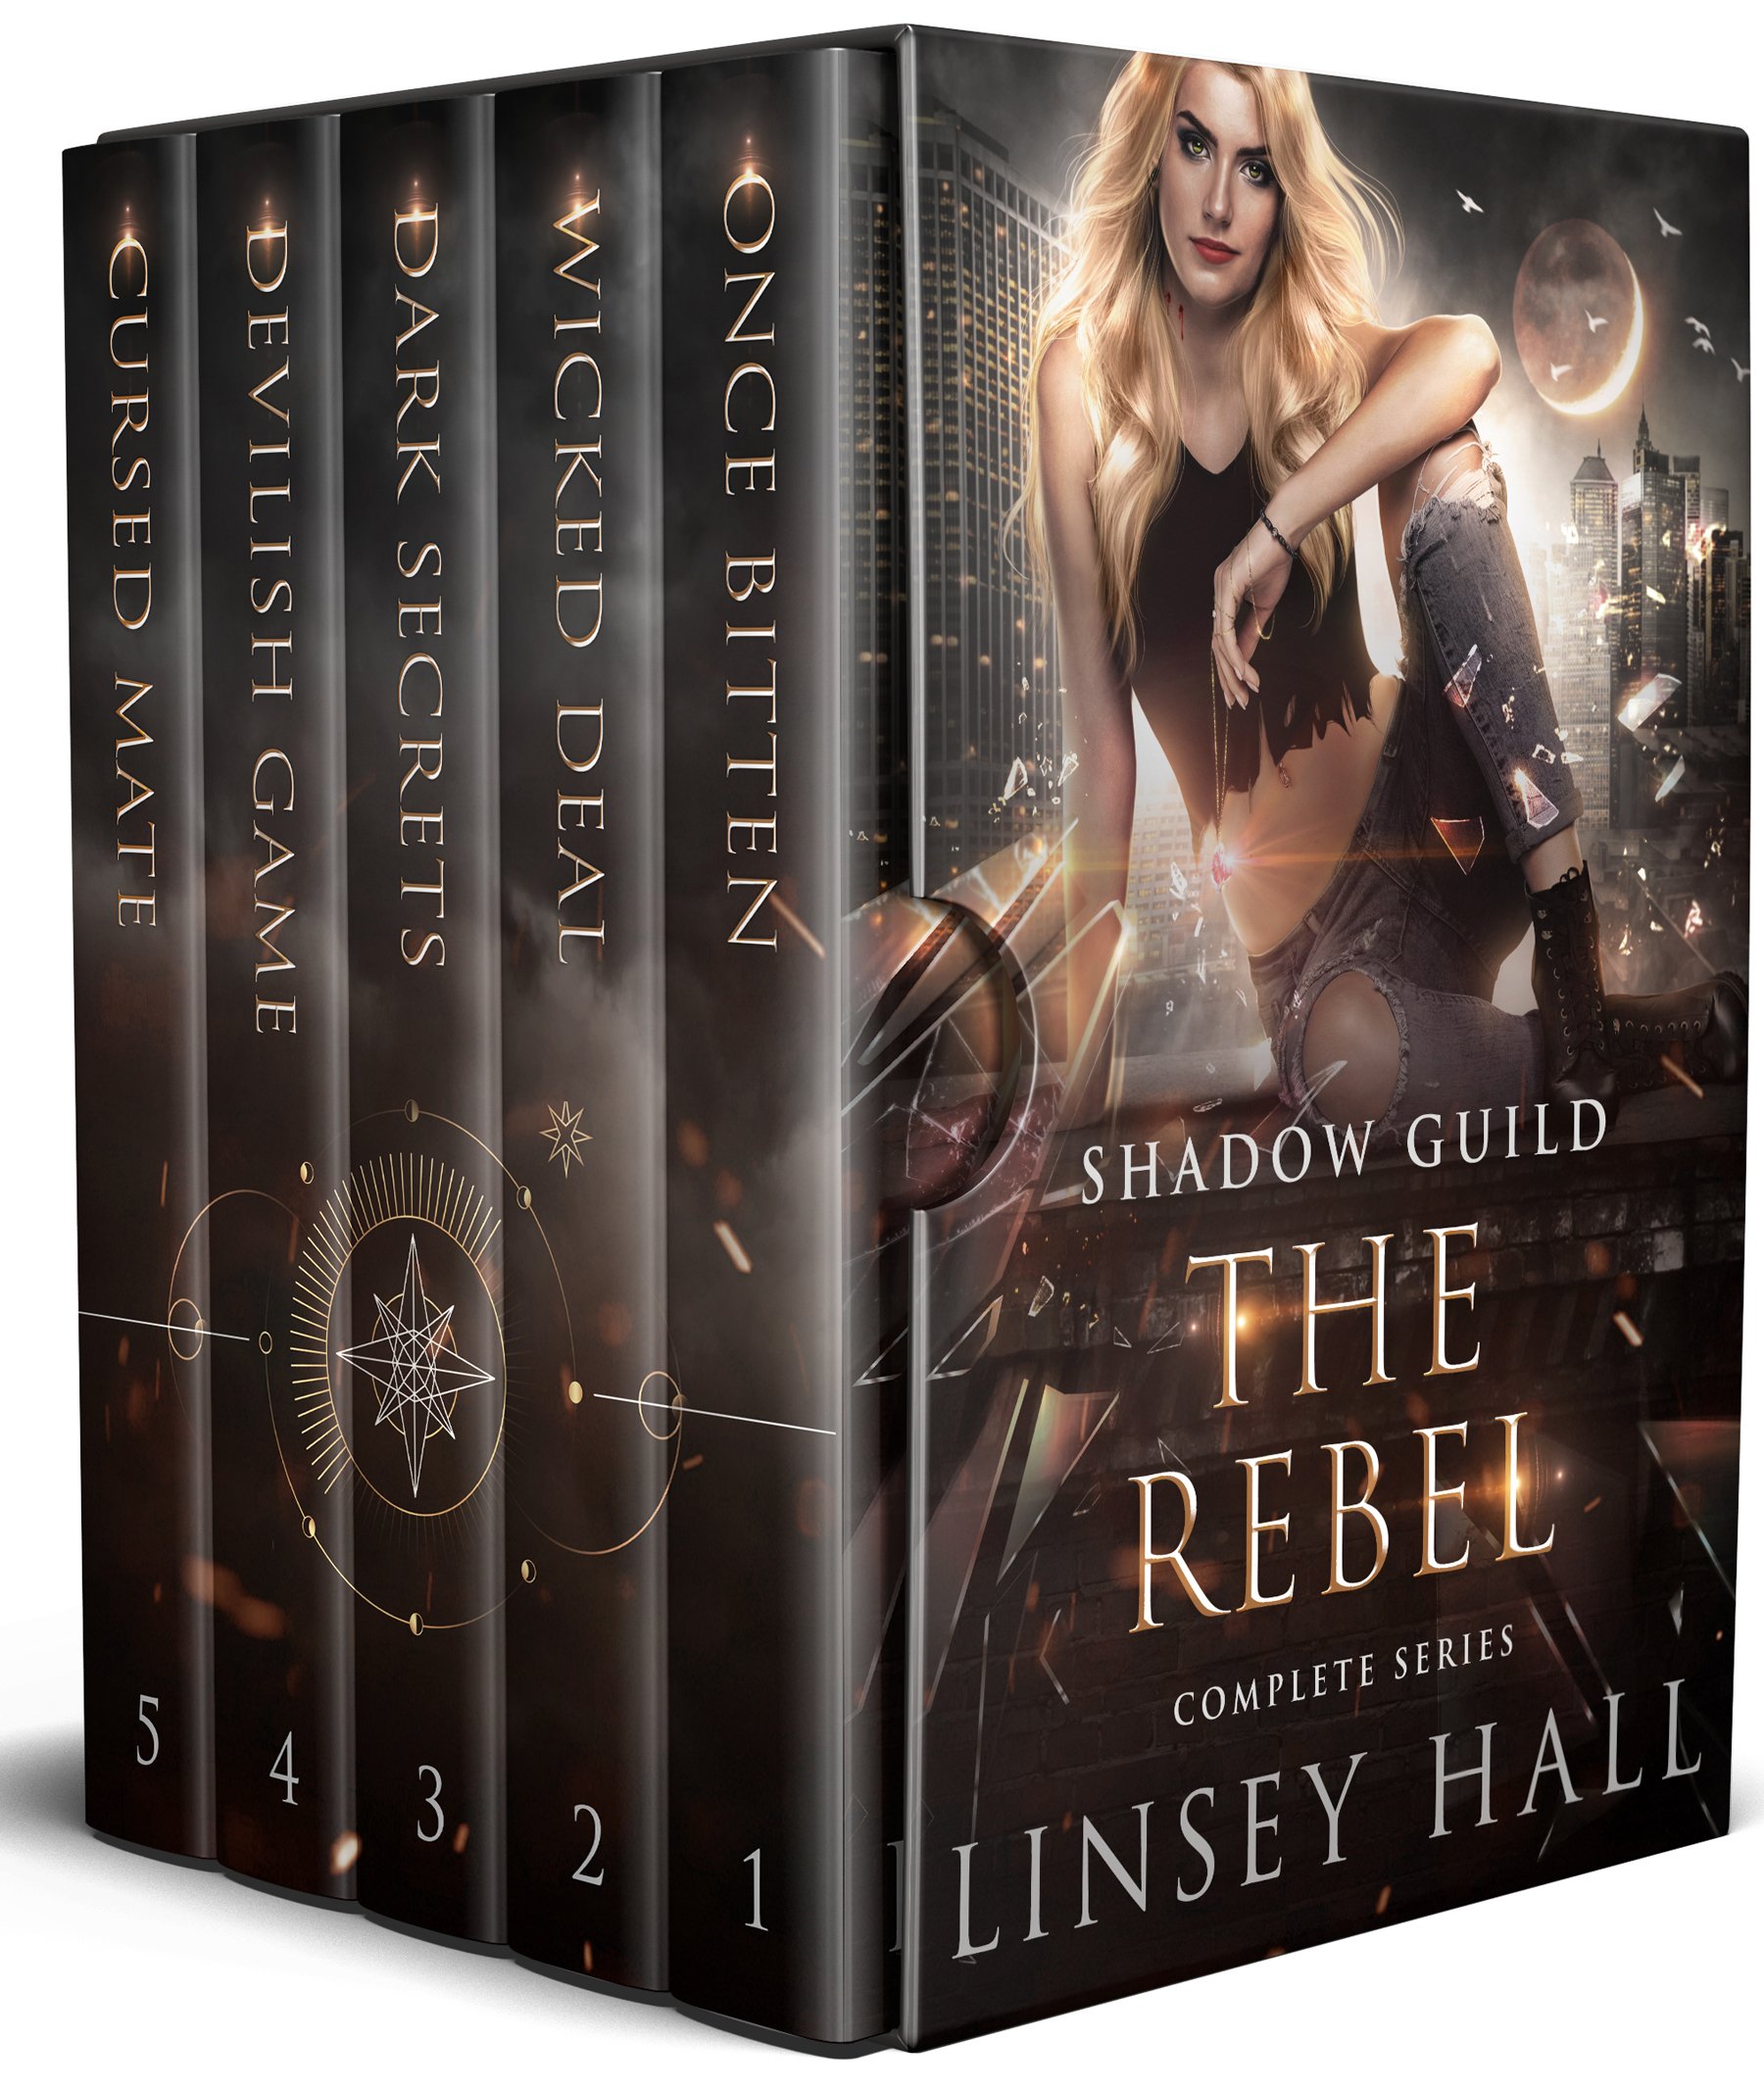 Linsey Hall, 4 book Shadow Guild Box Set